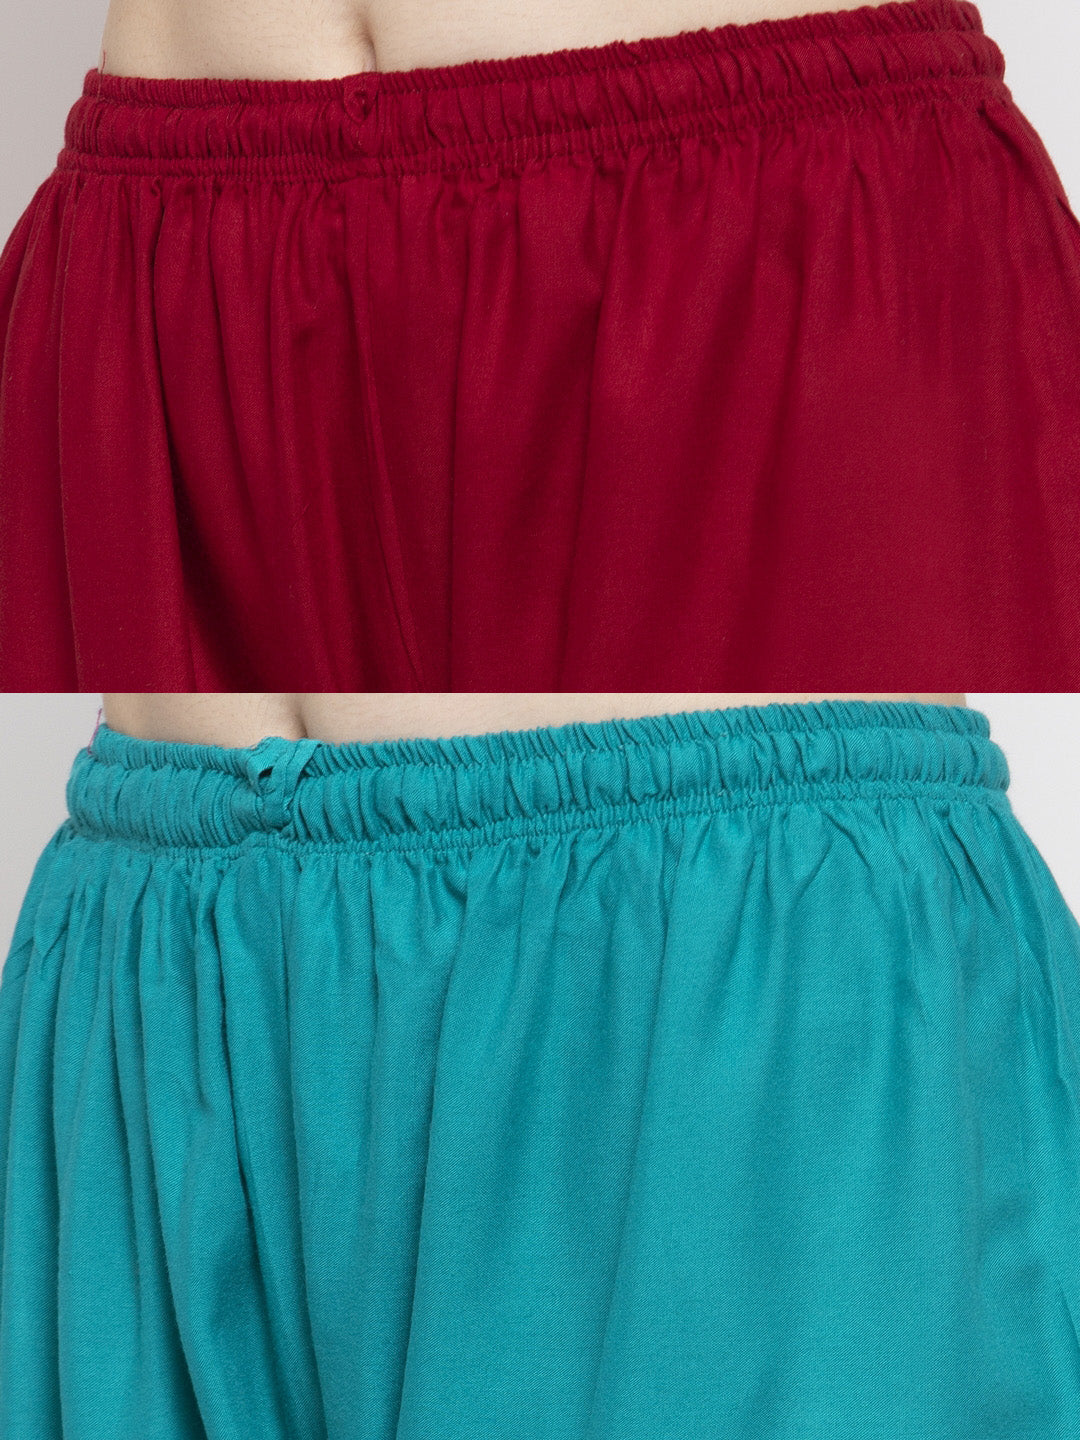 Women's Solid Maroon & Turquoise Rayon Palazzo (Pack Of 2) - Wahe-NOOR